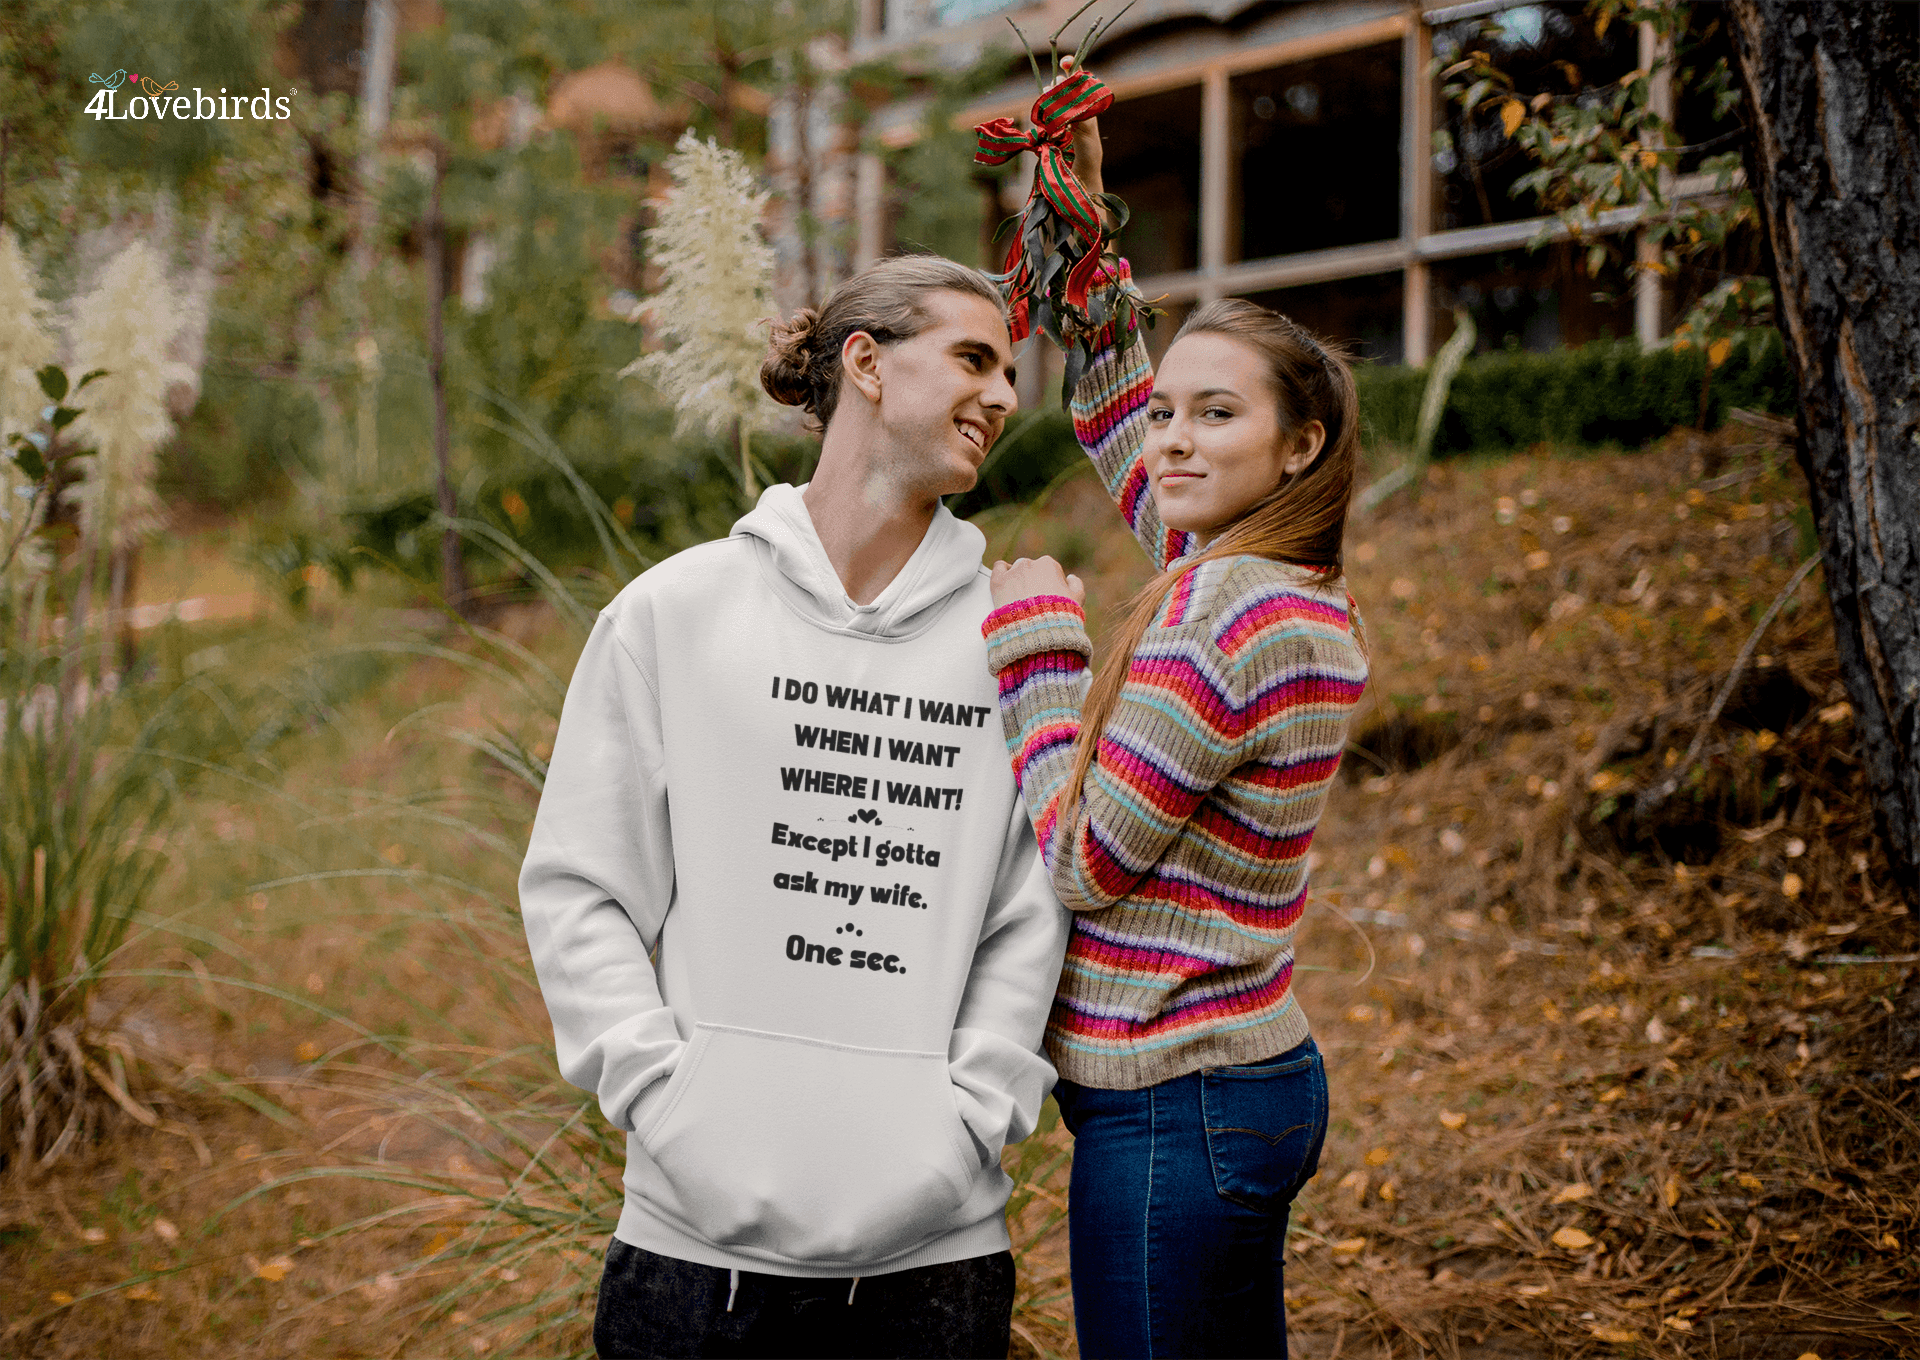 I Do What I Want When I Want Where I Want Except I Gotta Ask My Wife Funny Hoodie Funny Gifts For Men T shirt Gift For Husband - 4Lovebirds